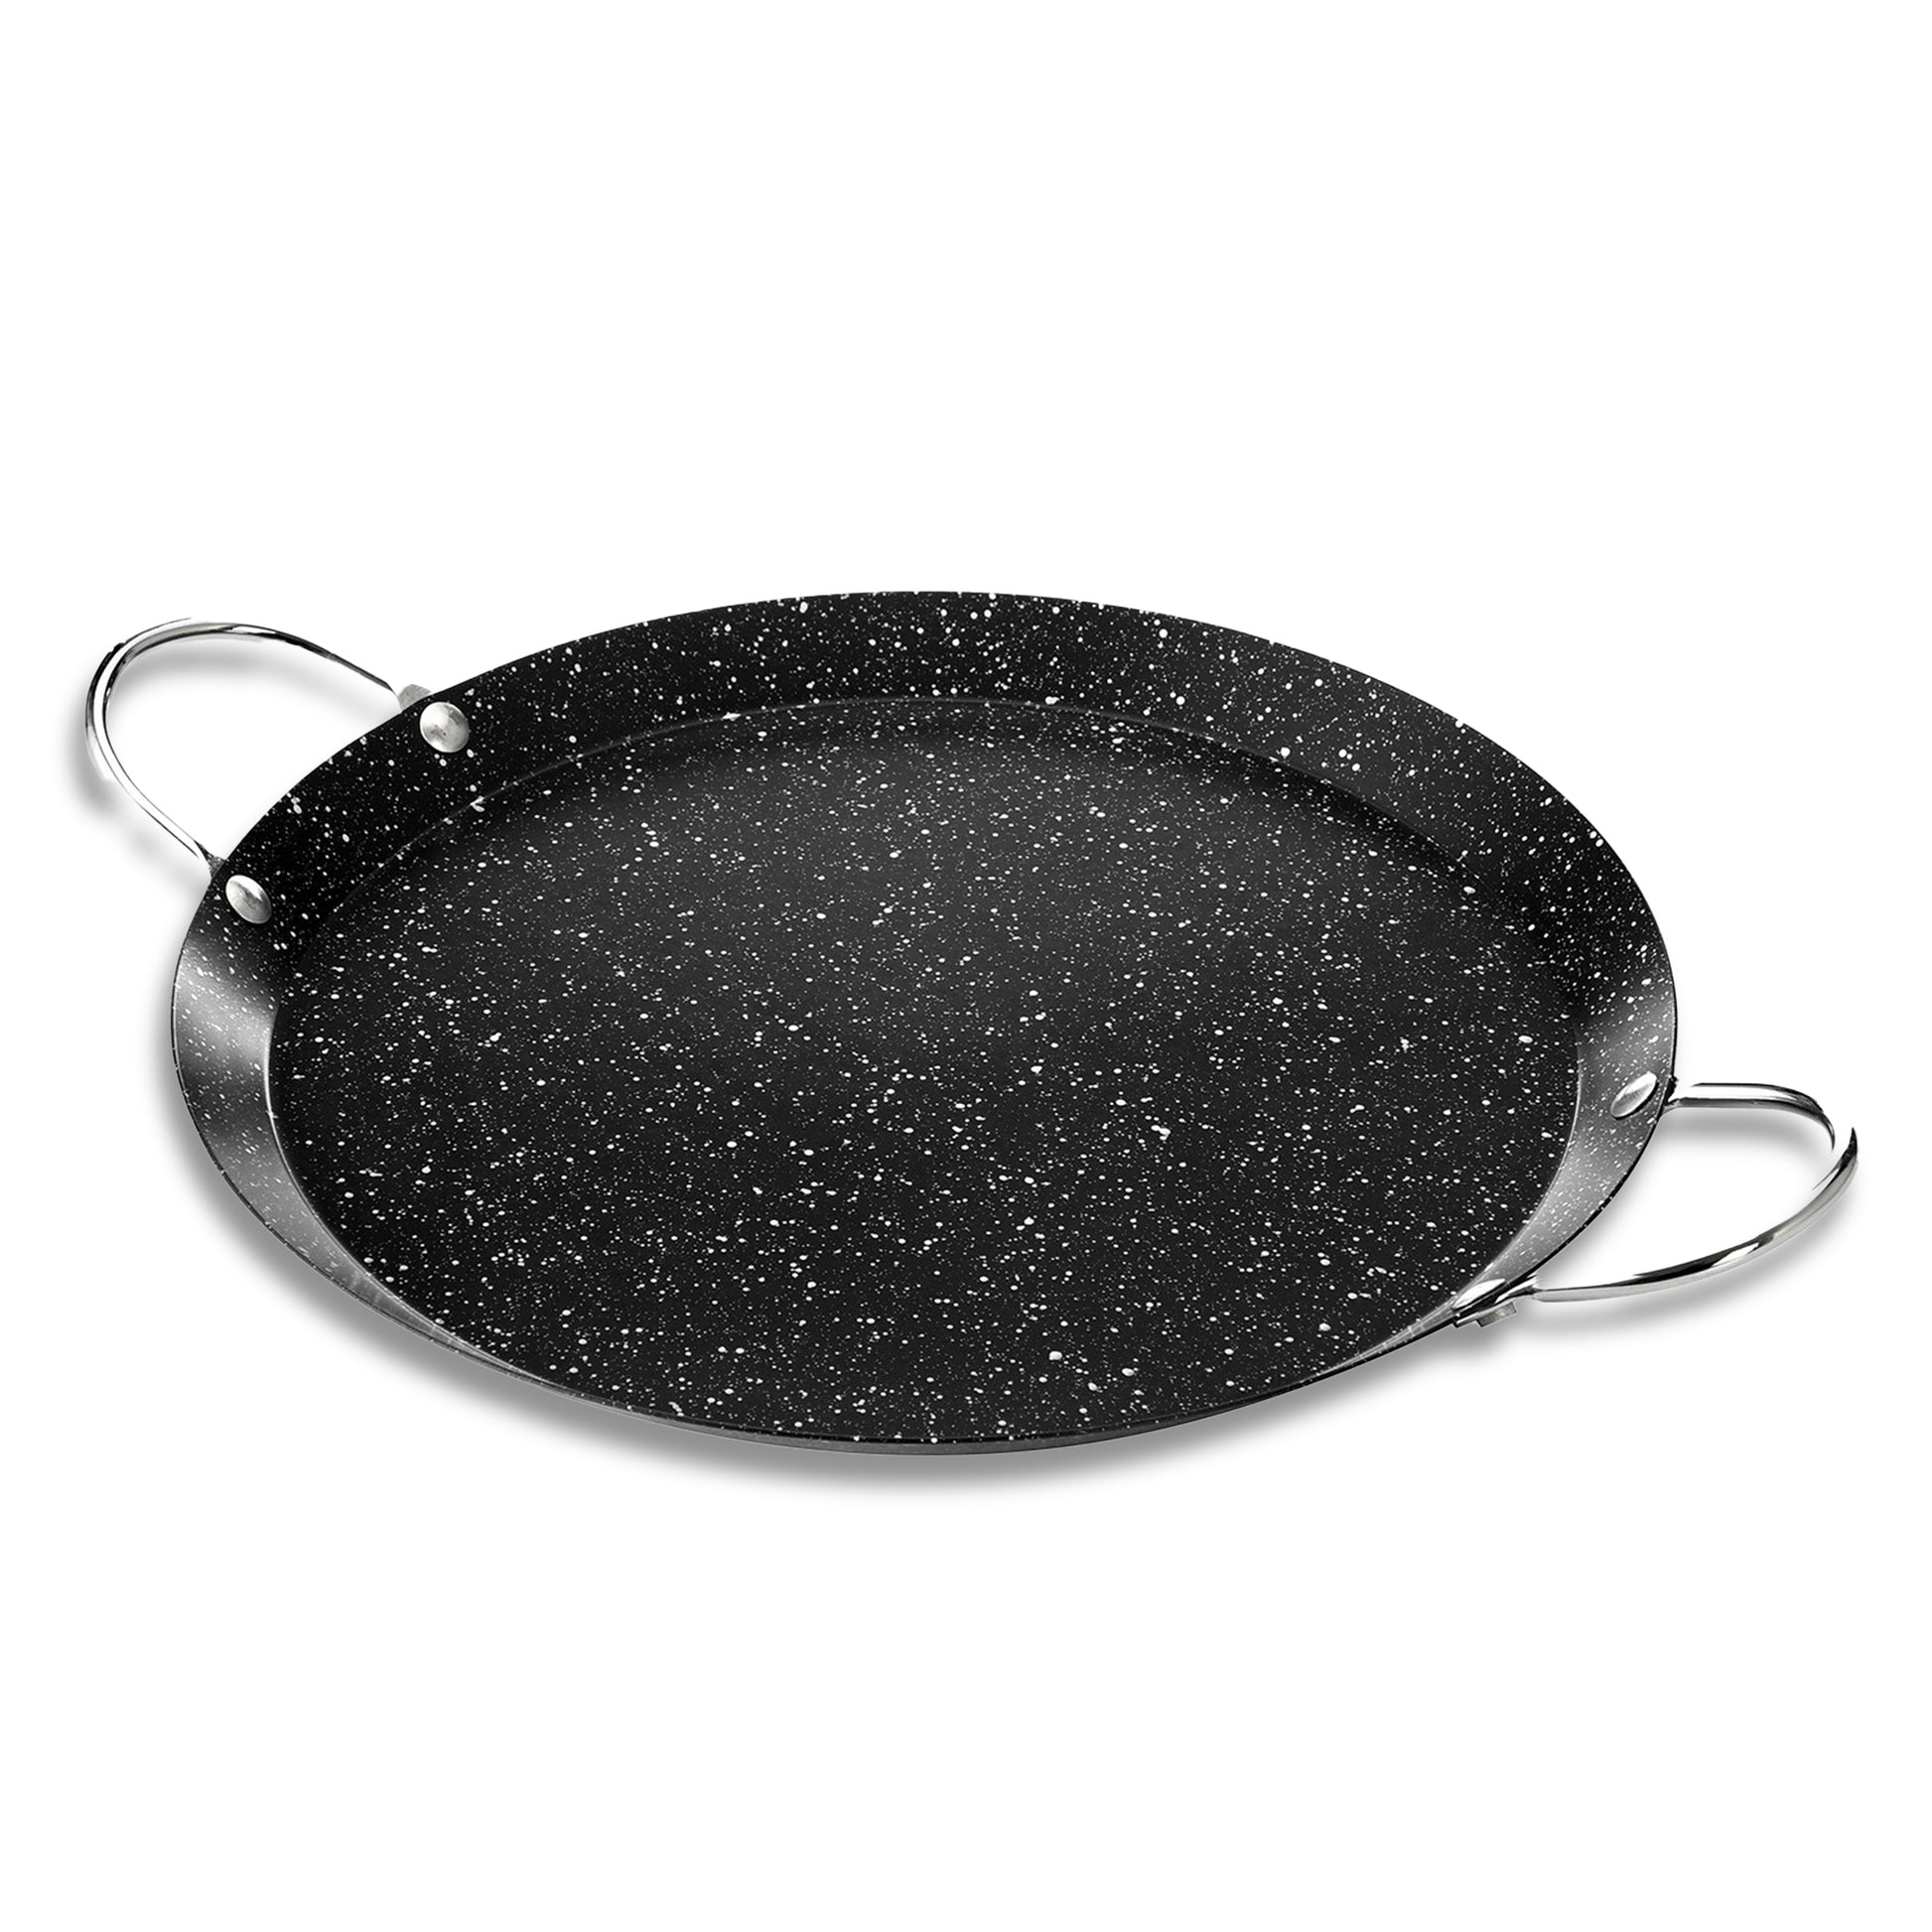 Alpine Cuisine Nonstick Oval Comal 17.5x8-Inch - Black Carbon Steel Tortilla  Comal with Single Handle - Durable, Heavy Duty Comal for Cooking -  Even-Heating & Long Lasting - Versatile Kitchen Cookware 